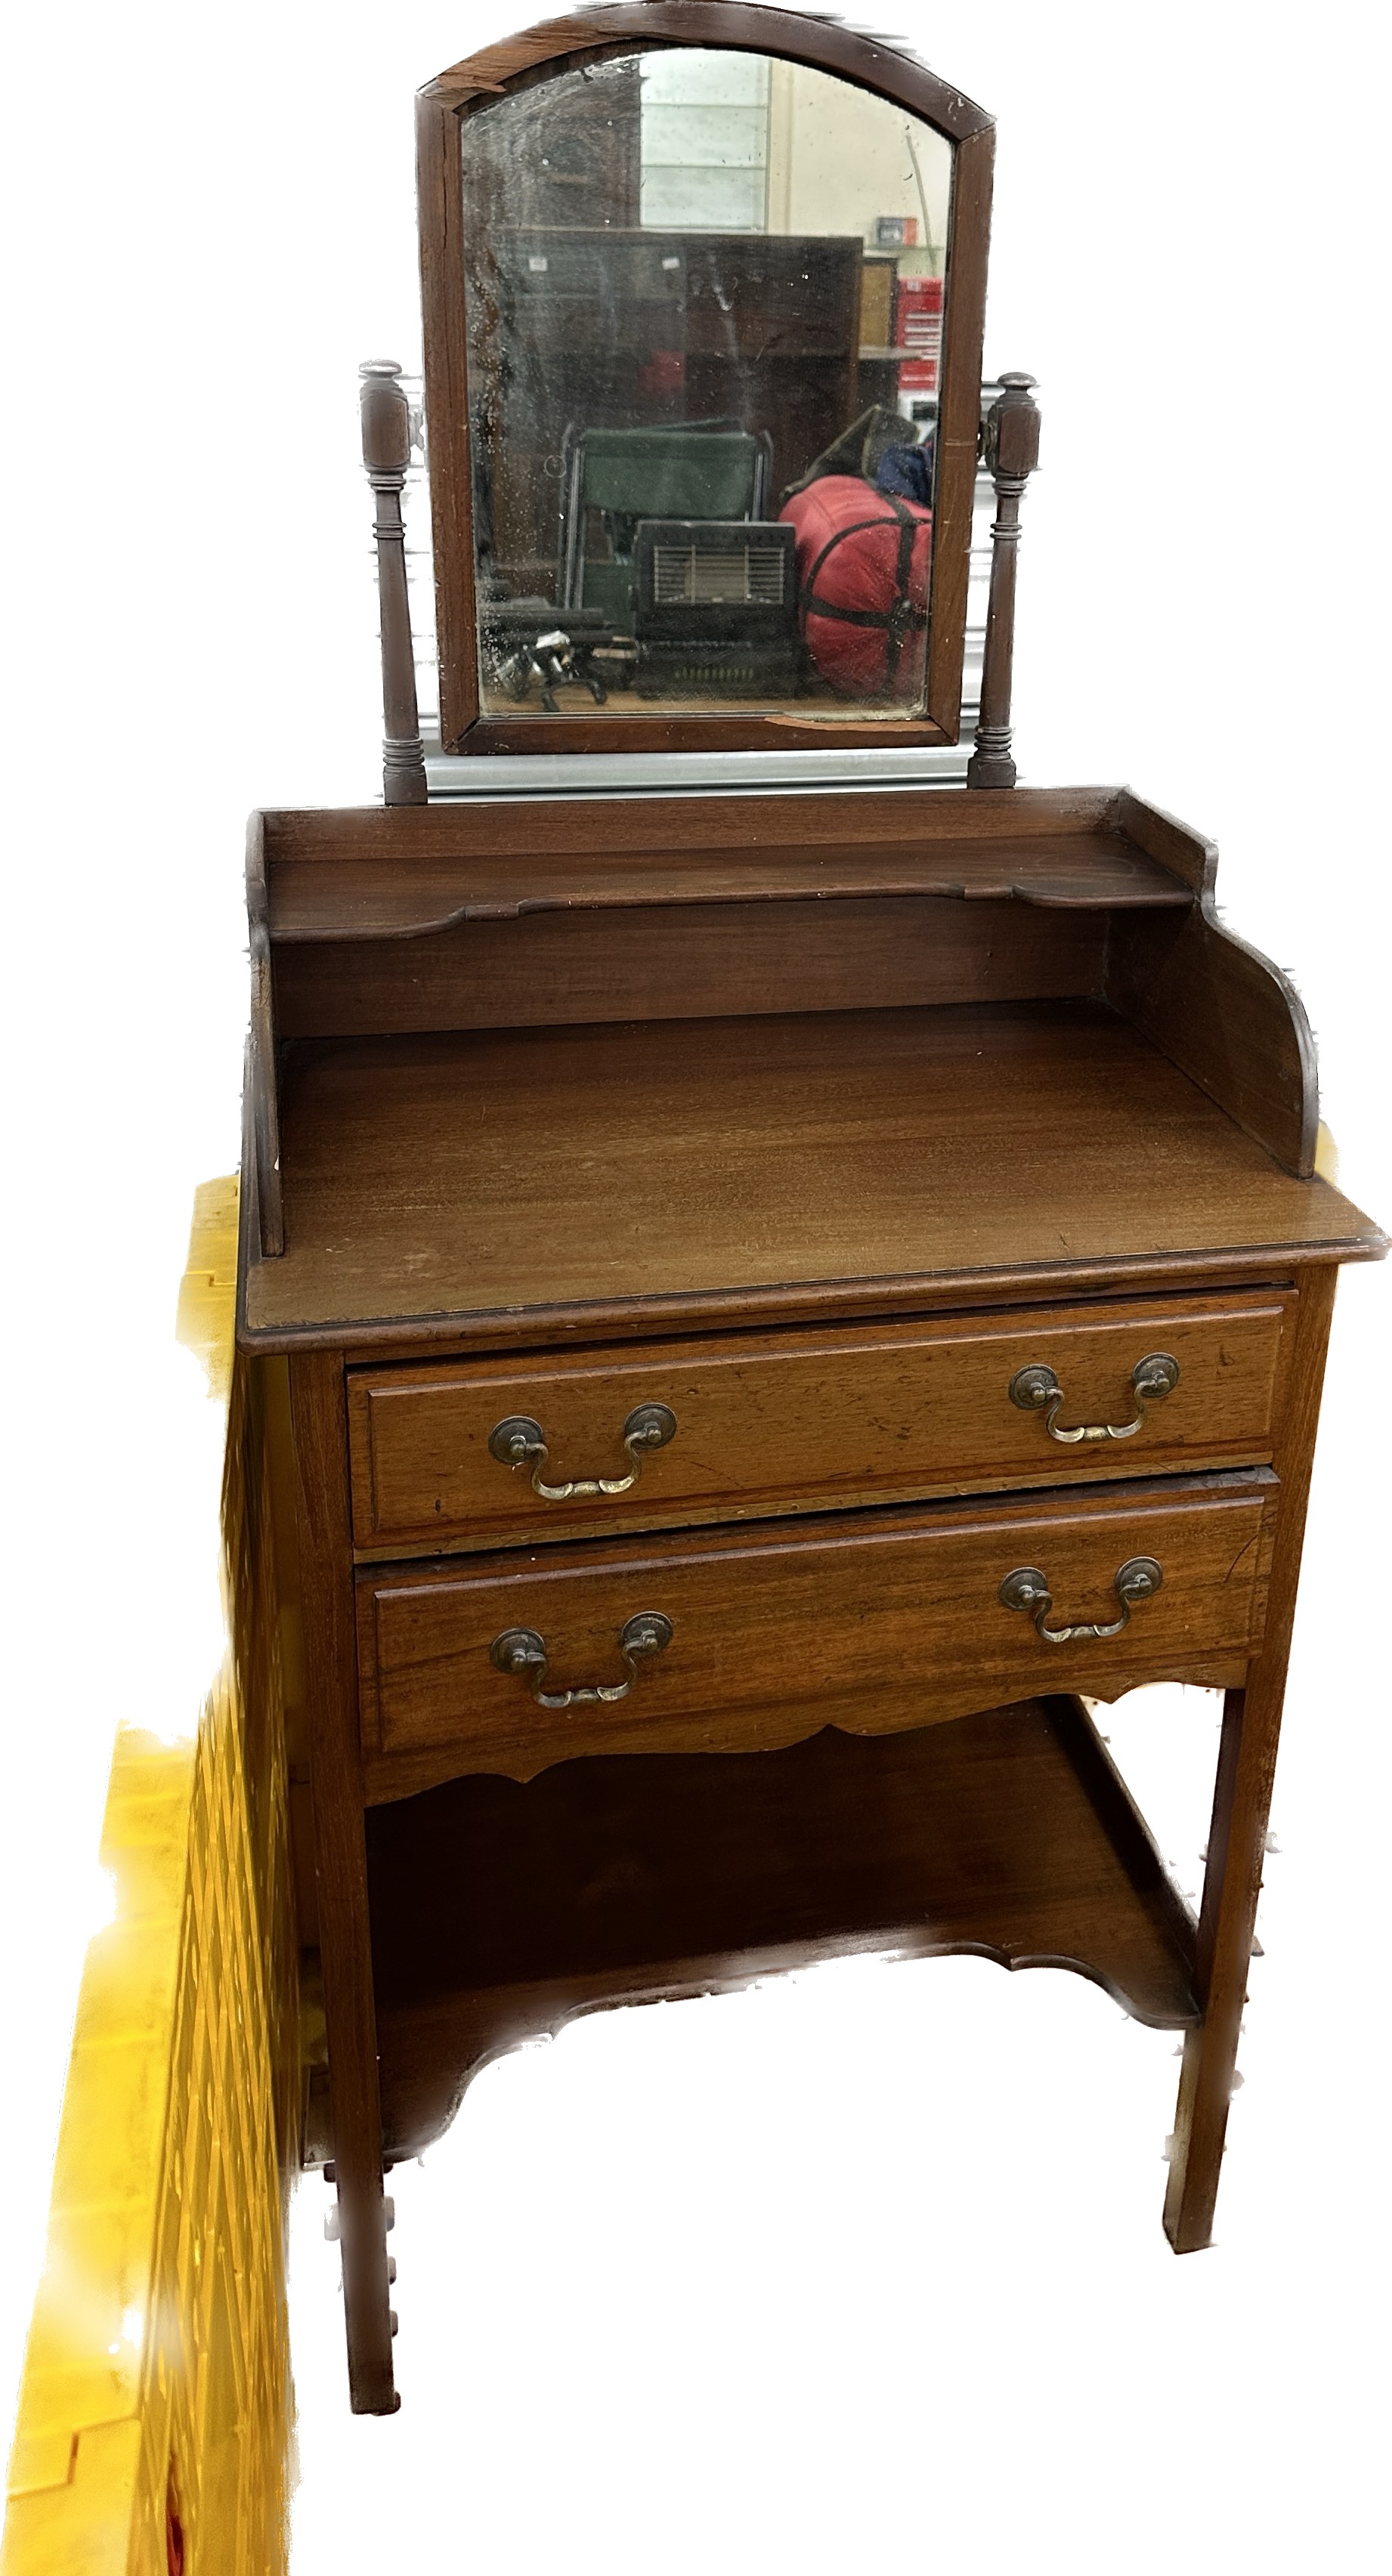 Mahogany 2 drawer dressing table measures approximately 59 inchea tall 18 inches depth 25.5 inches - Image 2 of 2